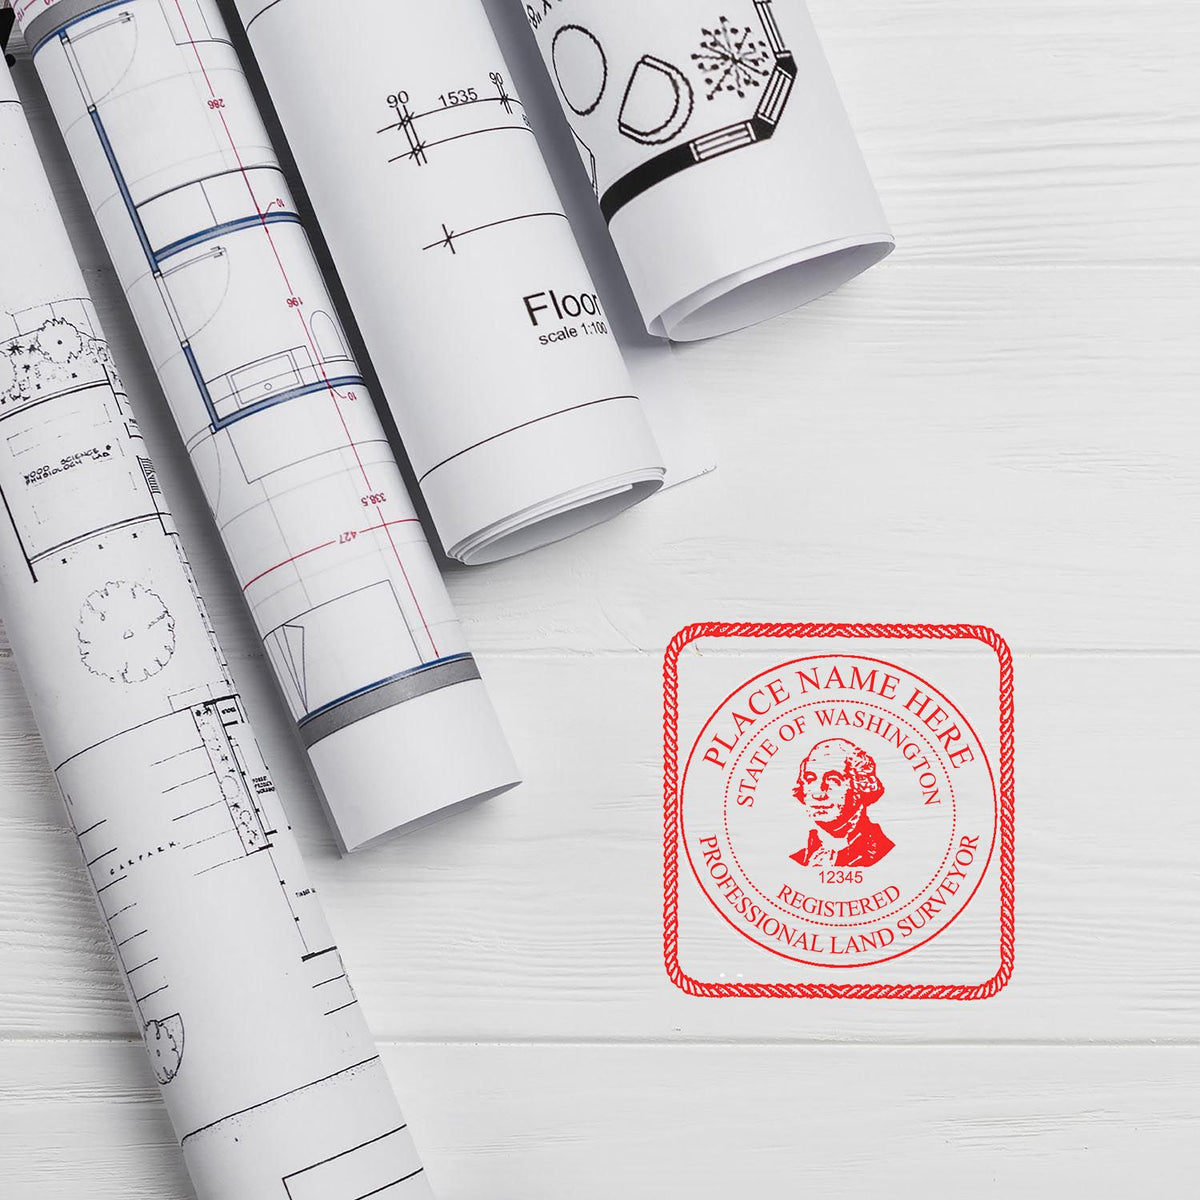 The Slim Pre-Inked Washington Land Surveyor Seal Stamp stamp impression comes to life with a crisp, detailed photo on paper - showcasing true professional quality.